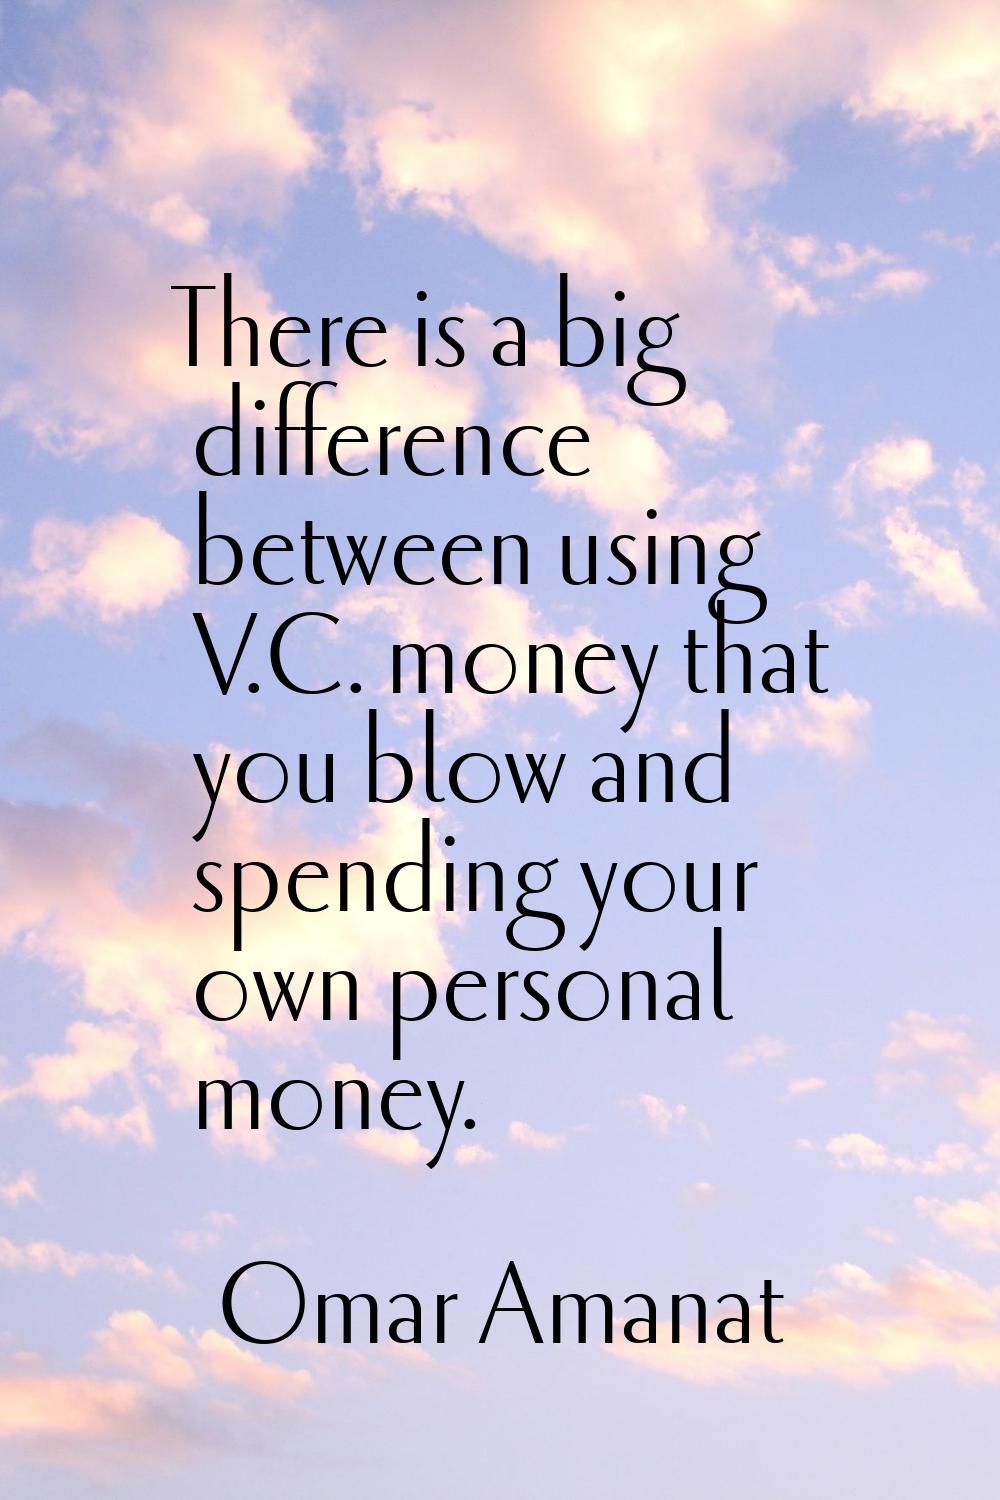 There is a big difference between using V.C. money that you blow and spending your own personal mon